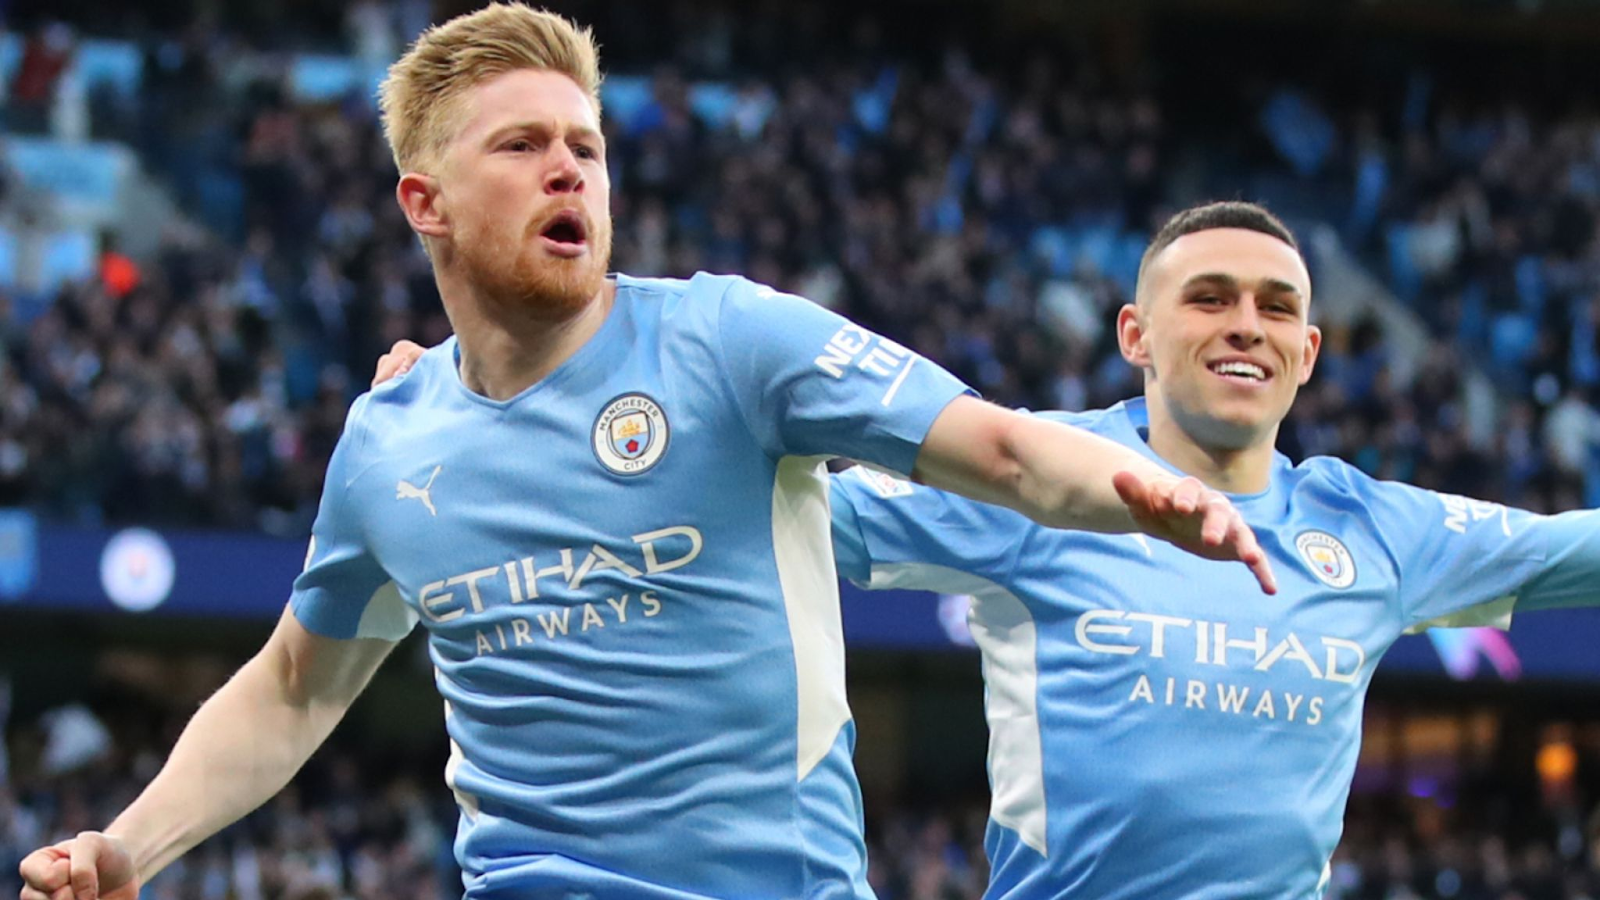 Kevin De Bruyne and Phil Foden were excellent against Real Madrid